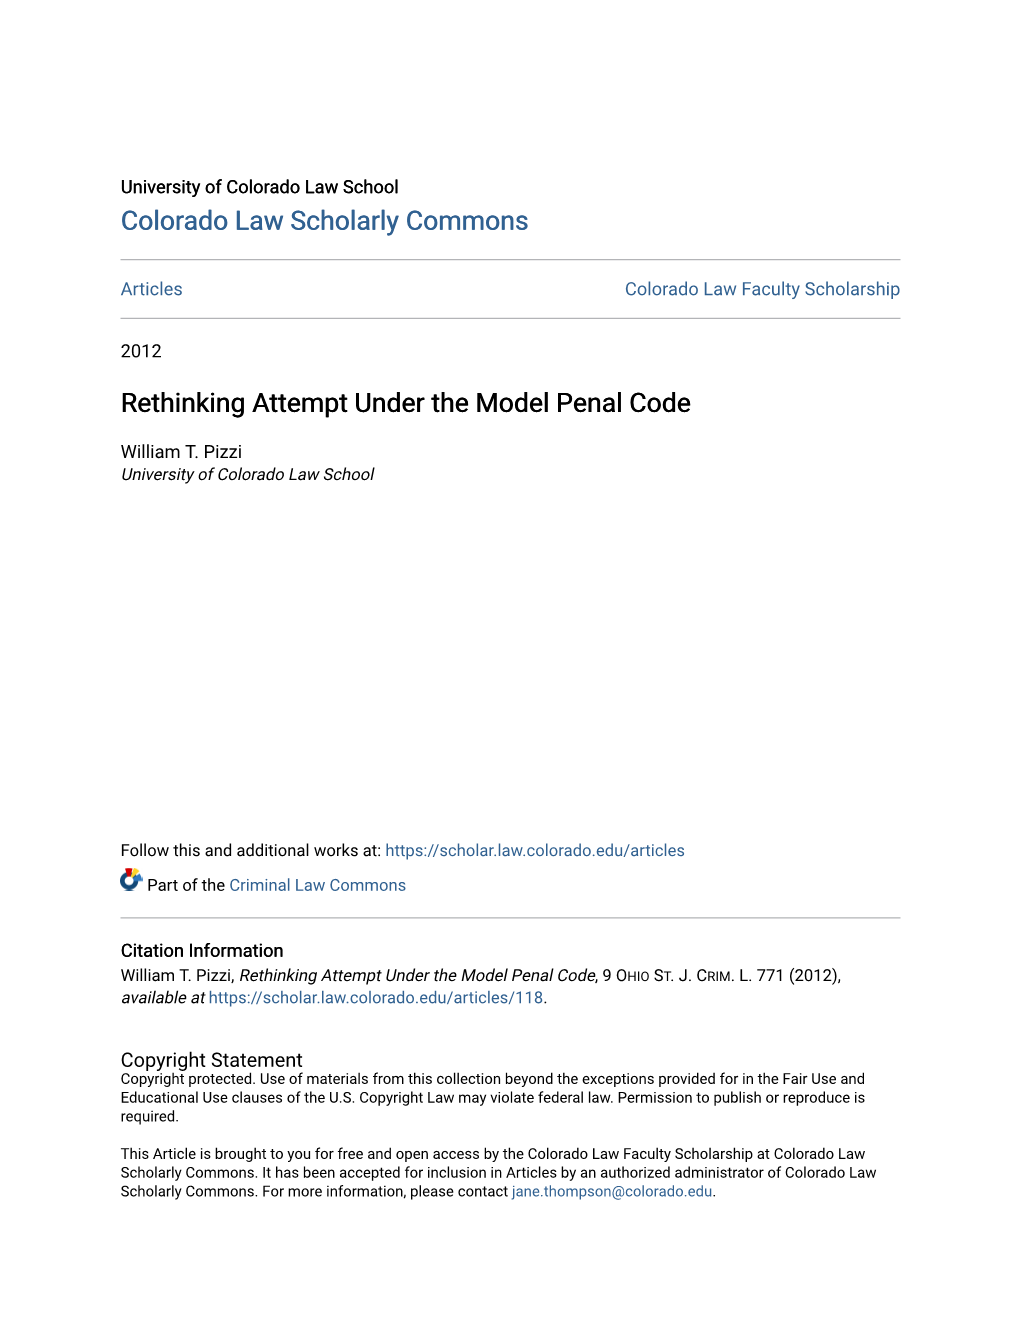 Rethinking Attempt Under the Model Penal Code